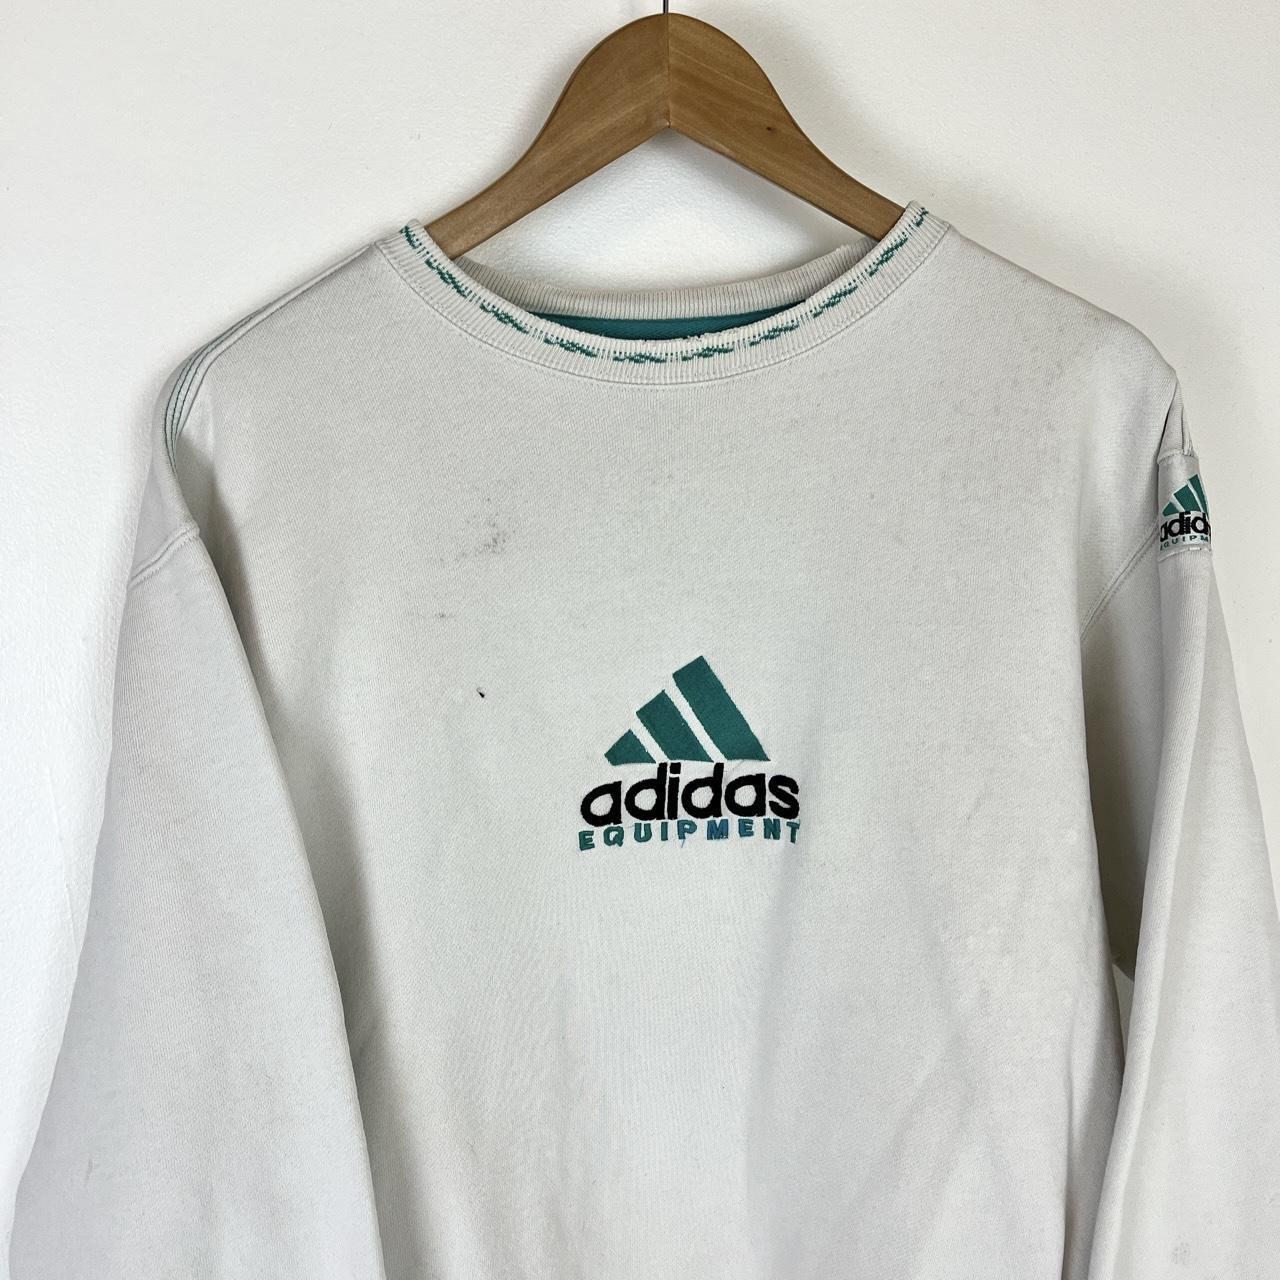 90’s Adidas Equipment White & Green Embroidered... - Depop